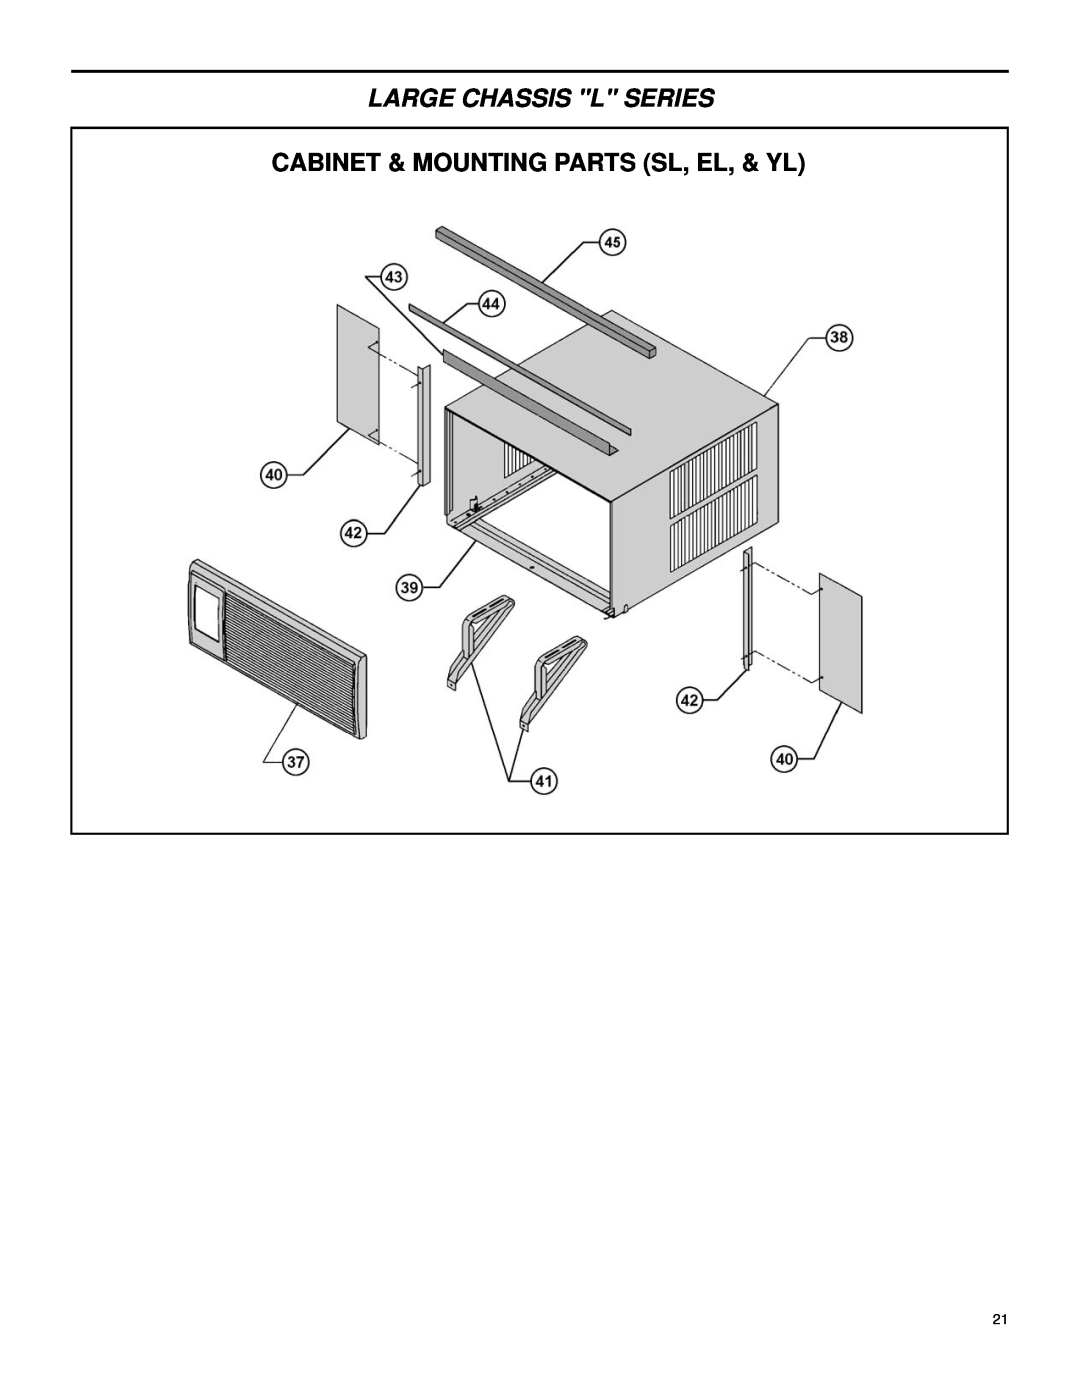 Friedrich Room Air Conditioners manual Cabinet & Mounting Parts Sl, El, & Yl, Large Chassis L Series 